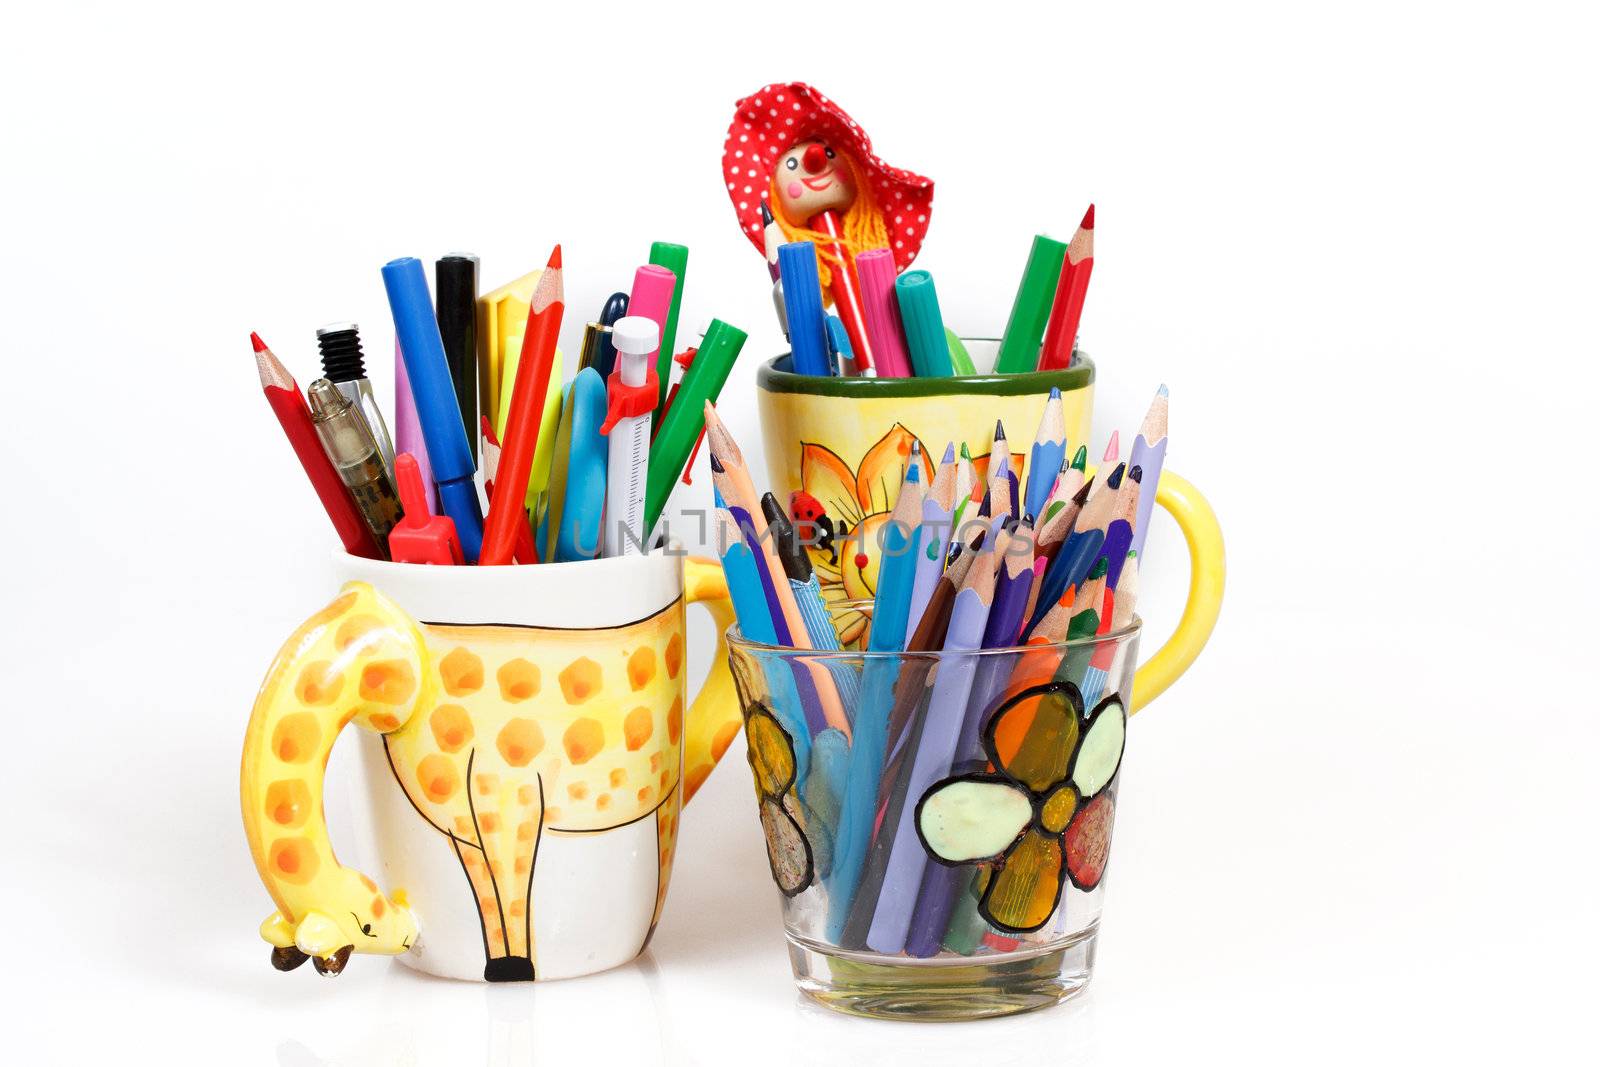 pen holders full of brightly colored pens on a white background 